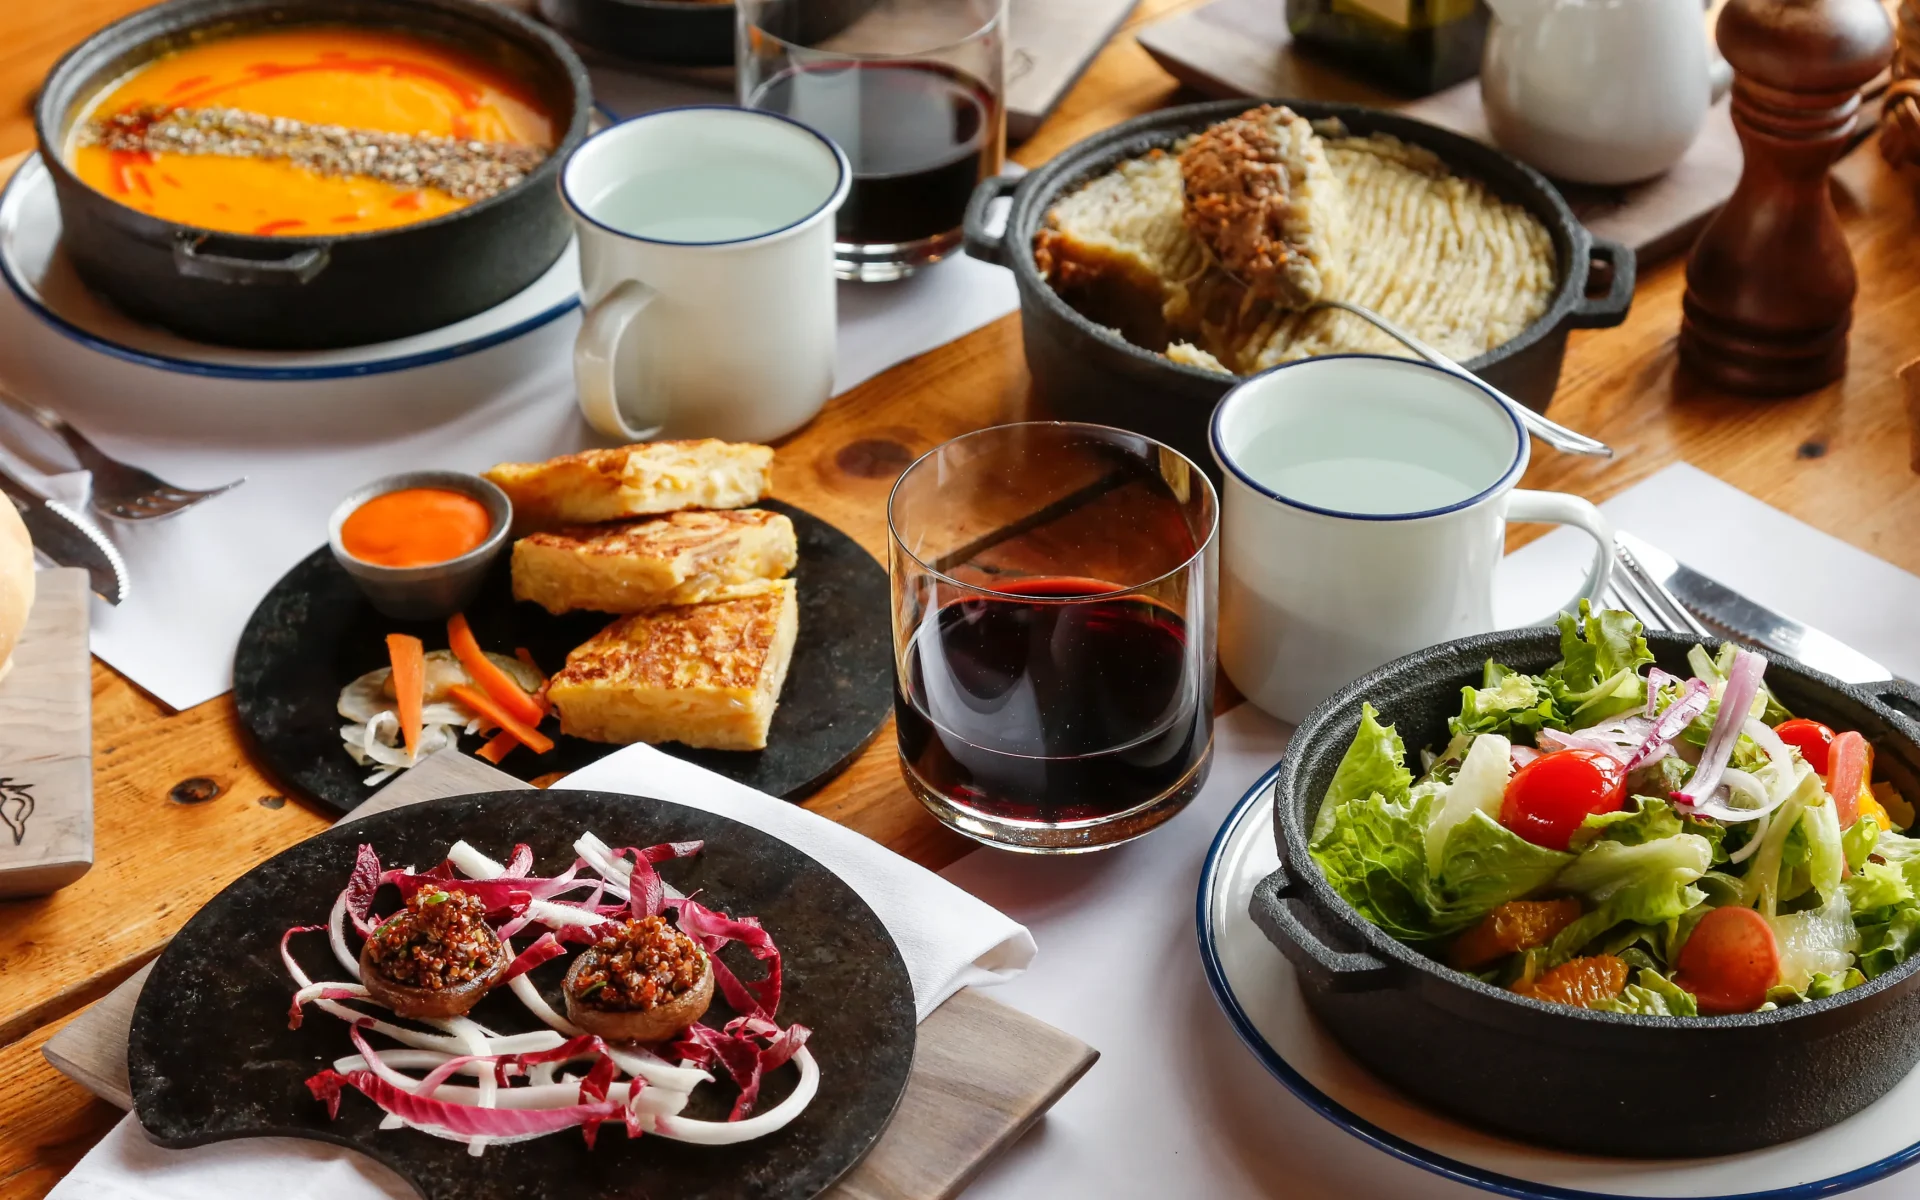 A selection of delicious, colourful dishes are laid out on the table, alongside two glasses of red wine.